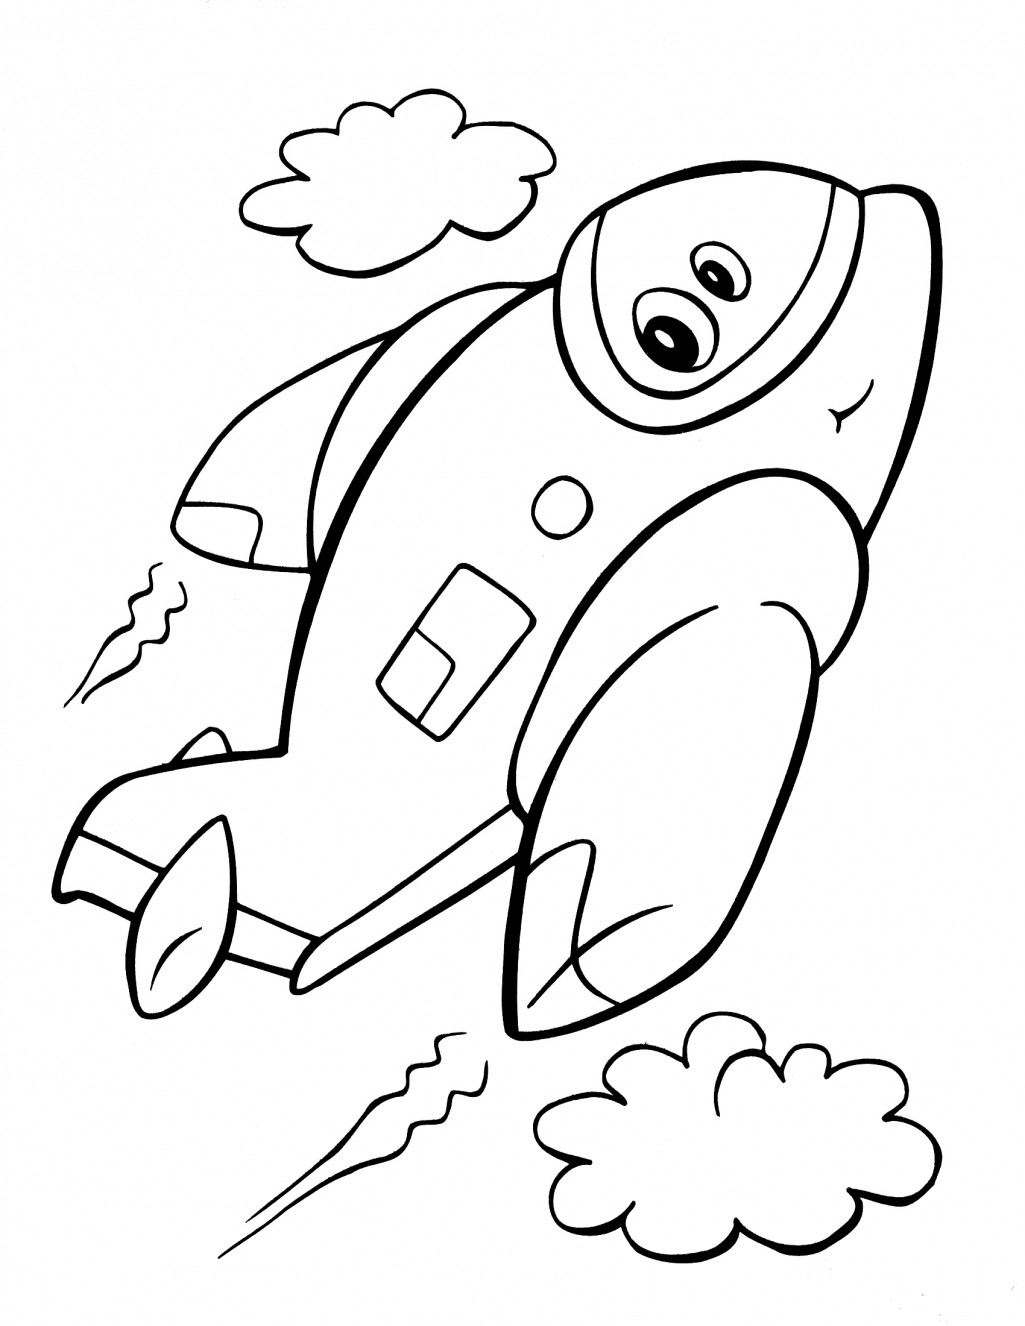 Free Printable Coloring Pages Crayola